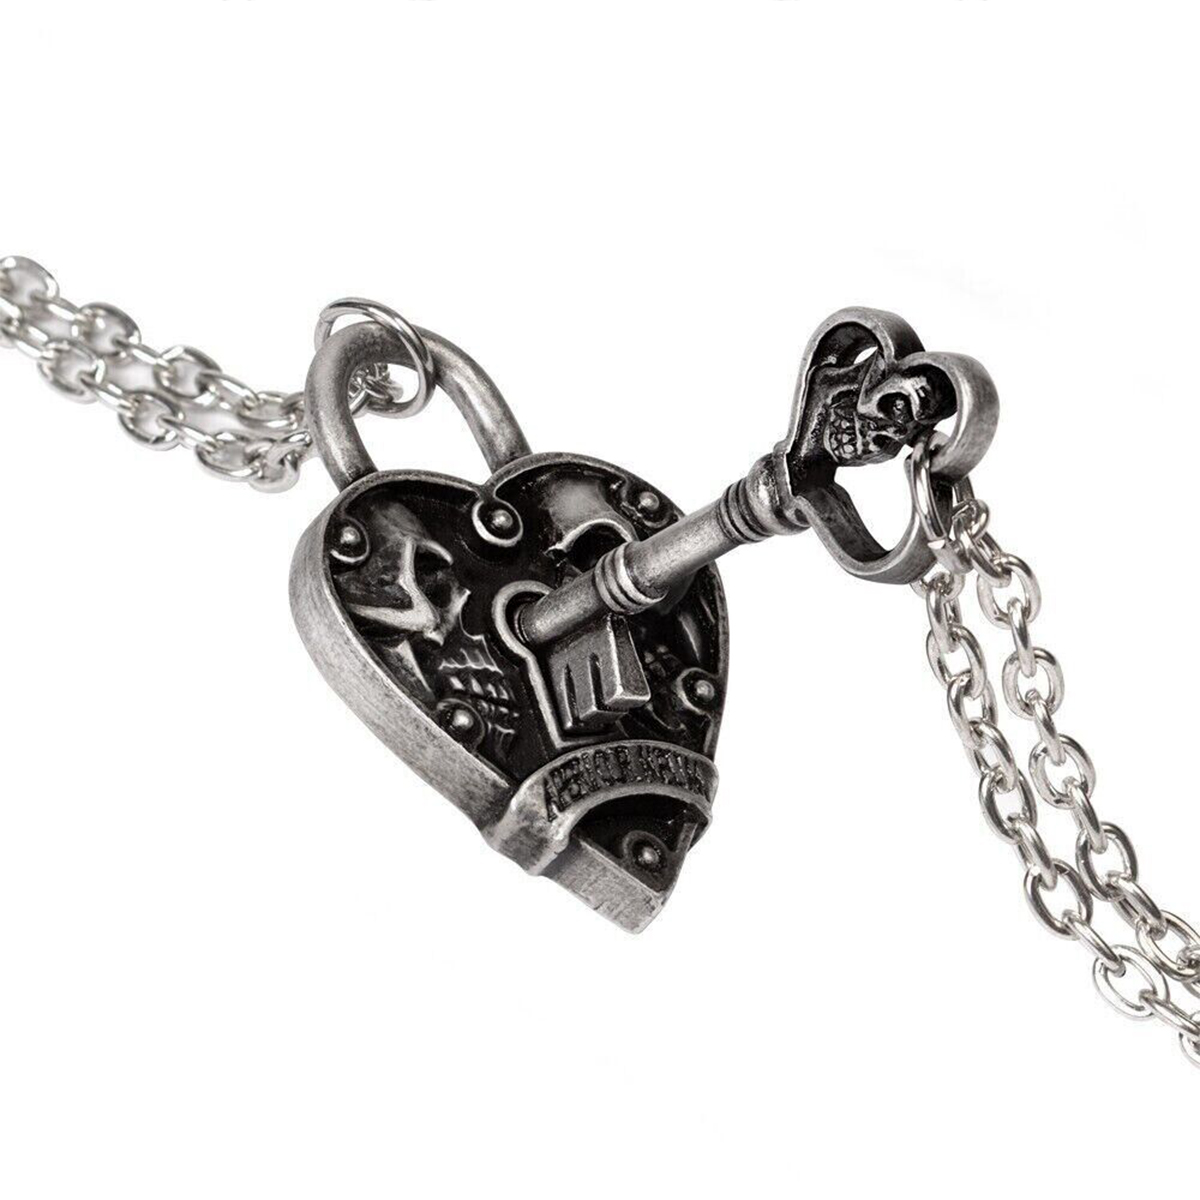 Source stainless steel heart lock and key chain necklace padlock